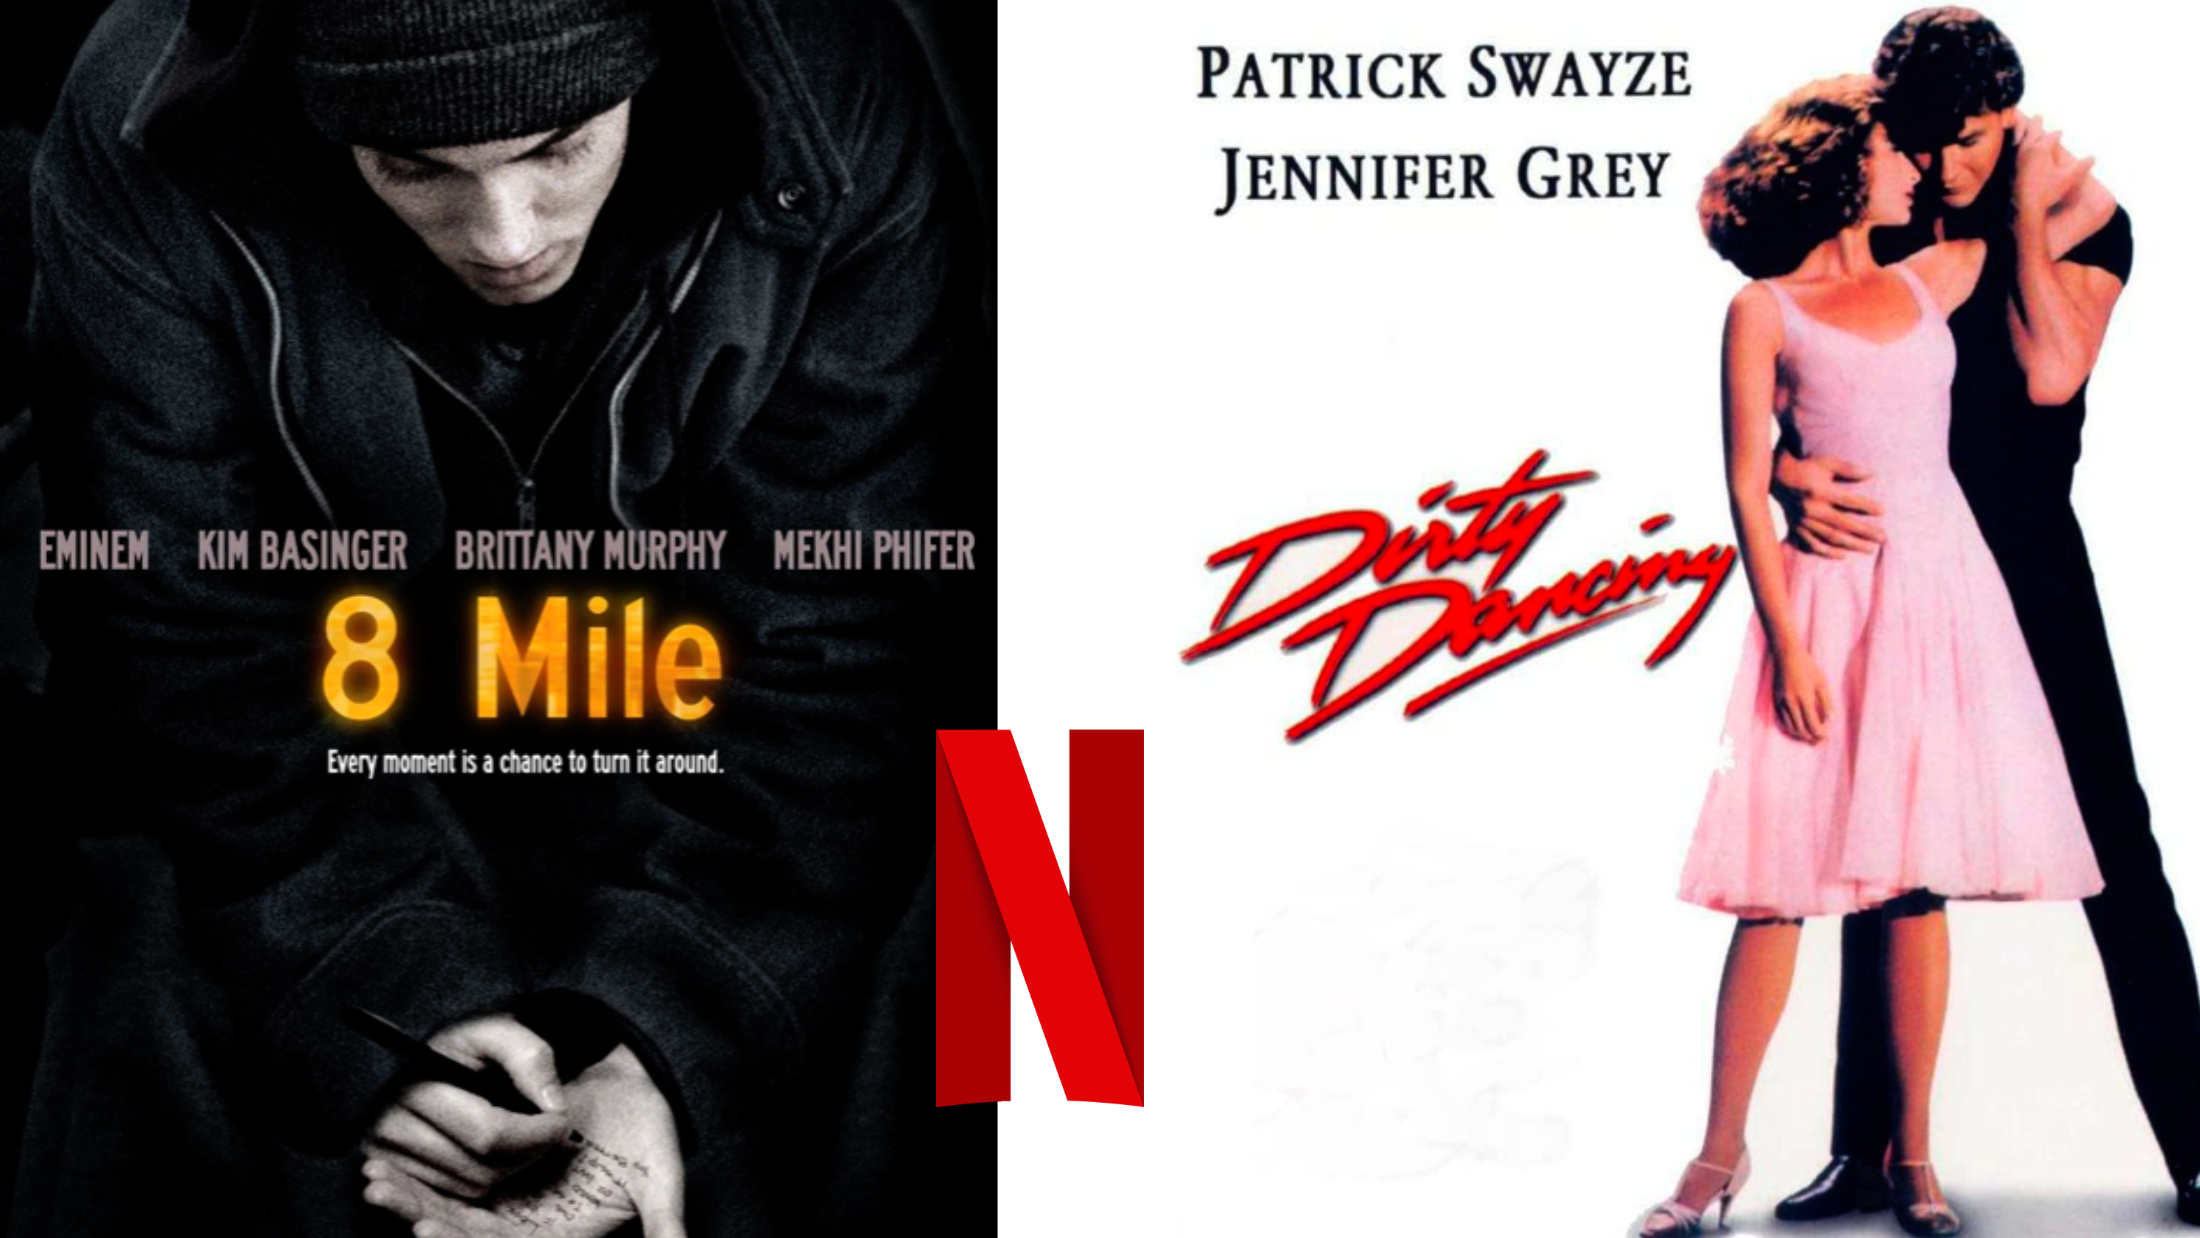 New Netflix Canada Releases This Week [1er avril]

